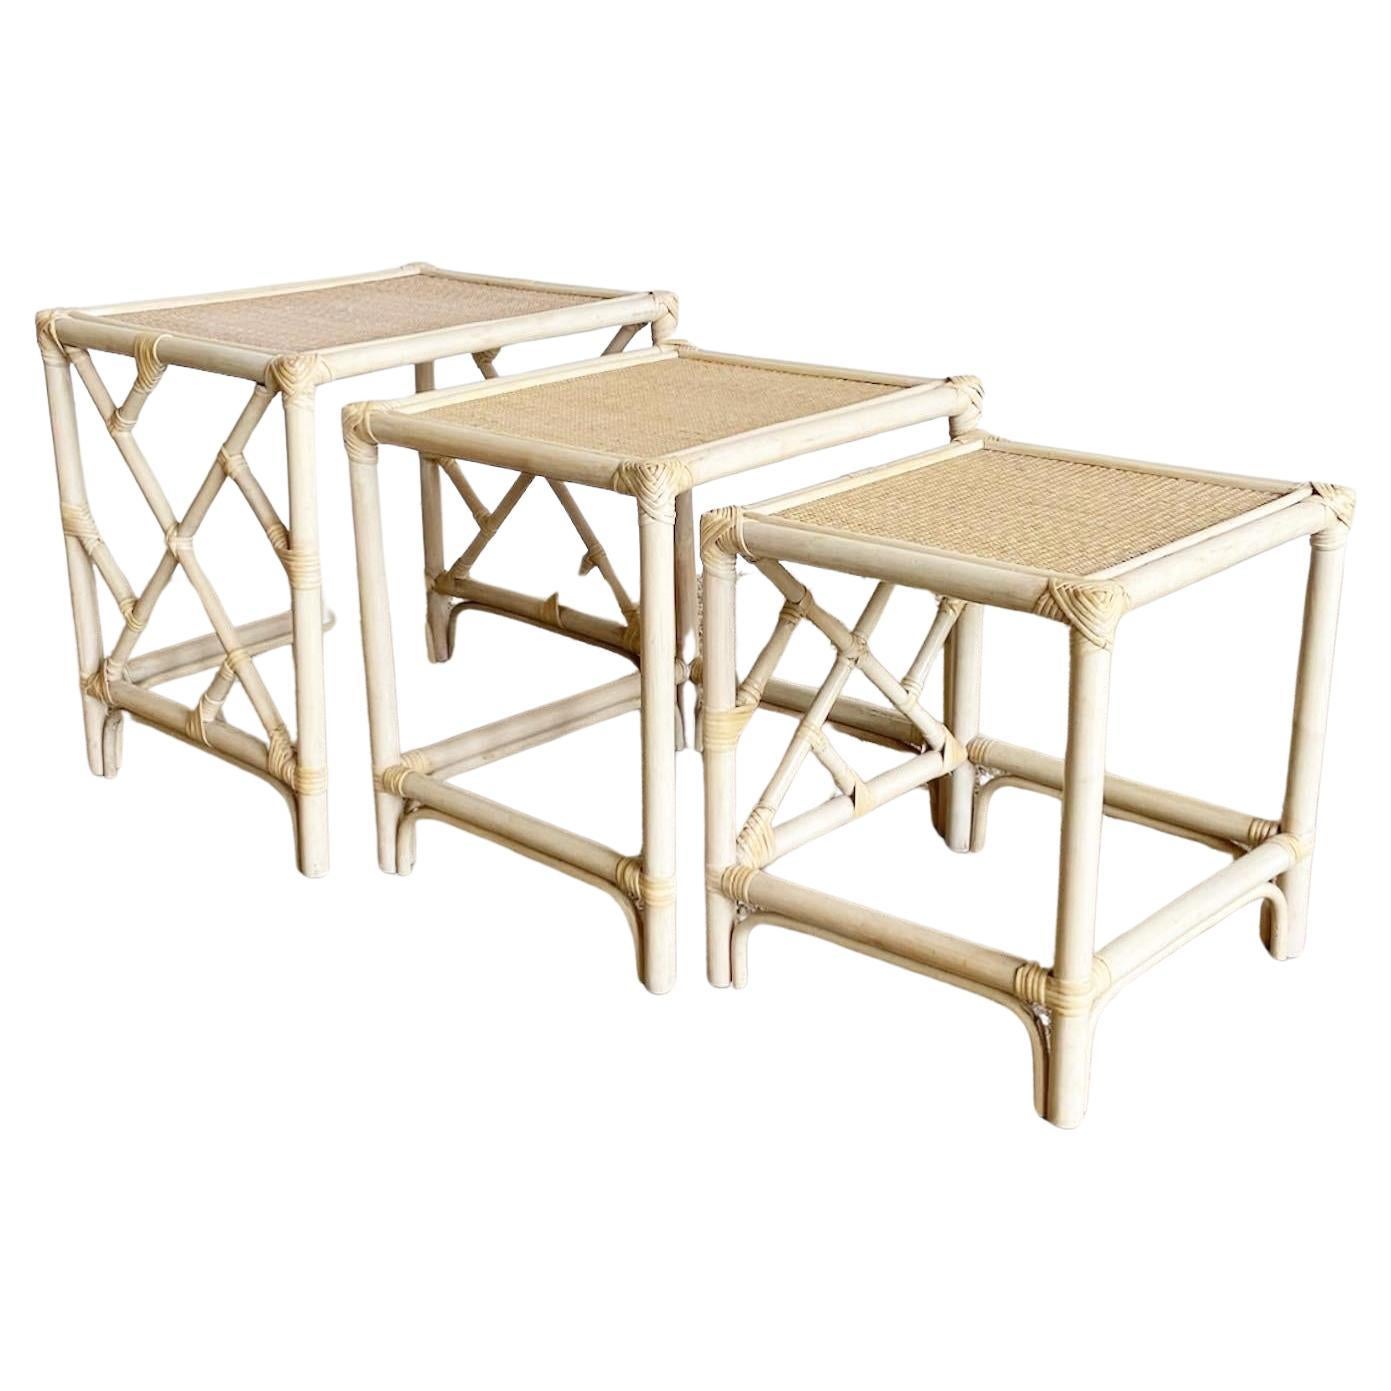 Boho Chic Bamboo Rattan Chippendale Style Nesting Tables - Set of 3